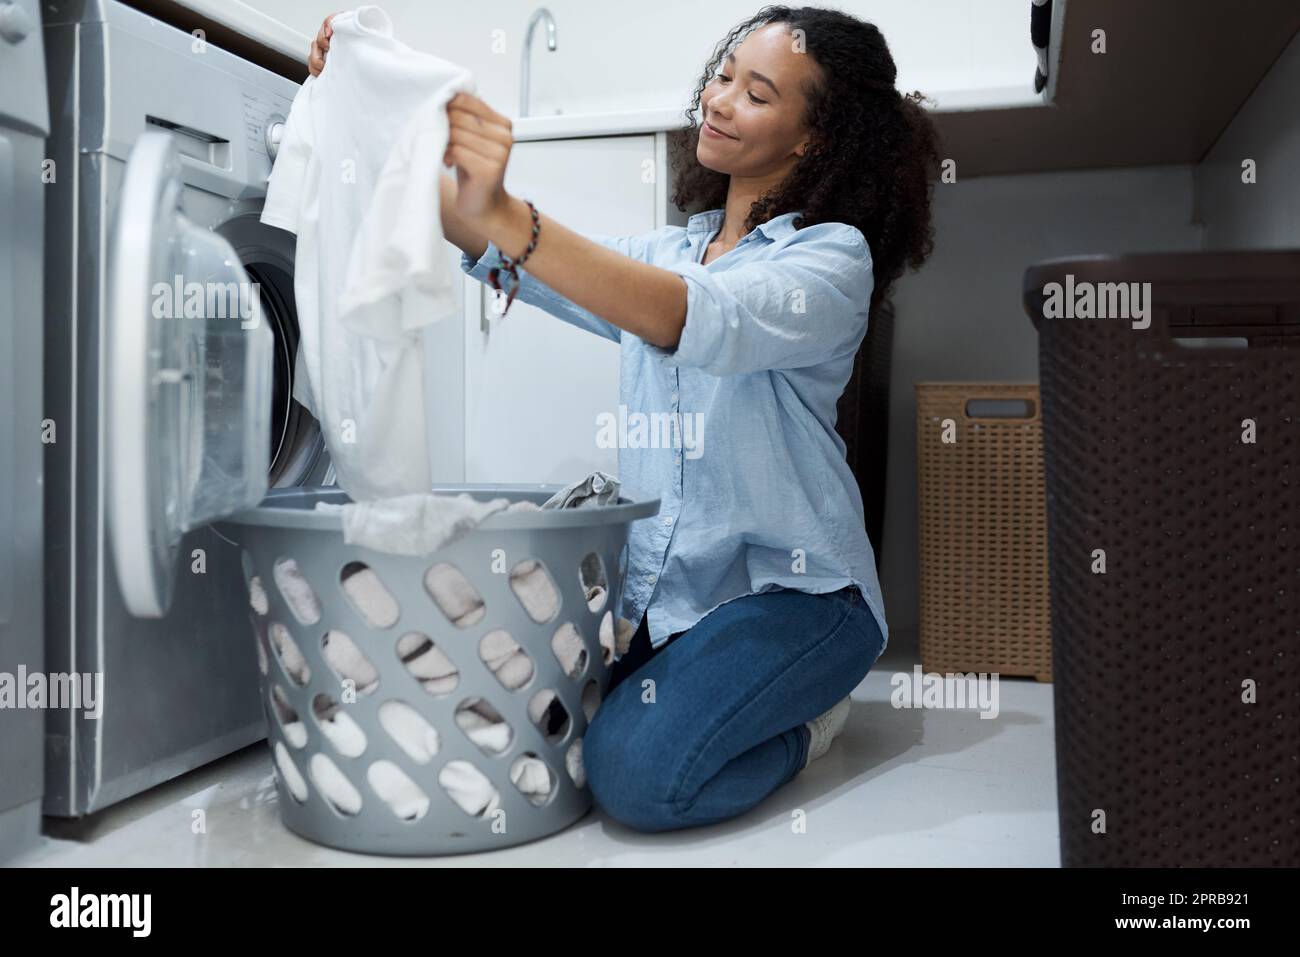 This washing powder really makes clothes sparkle. a young woman preparing to wash a load of laundry at home. Stock Photo